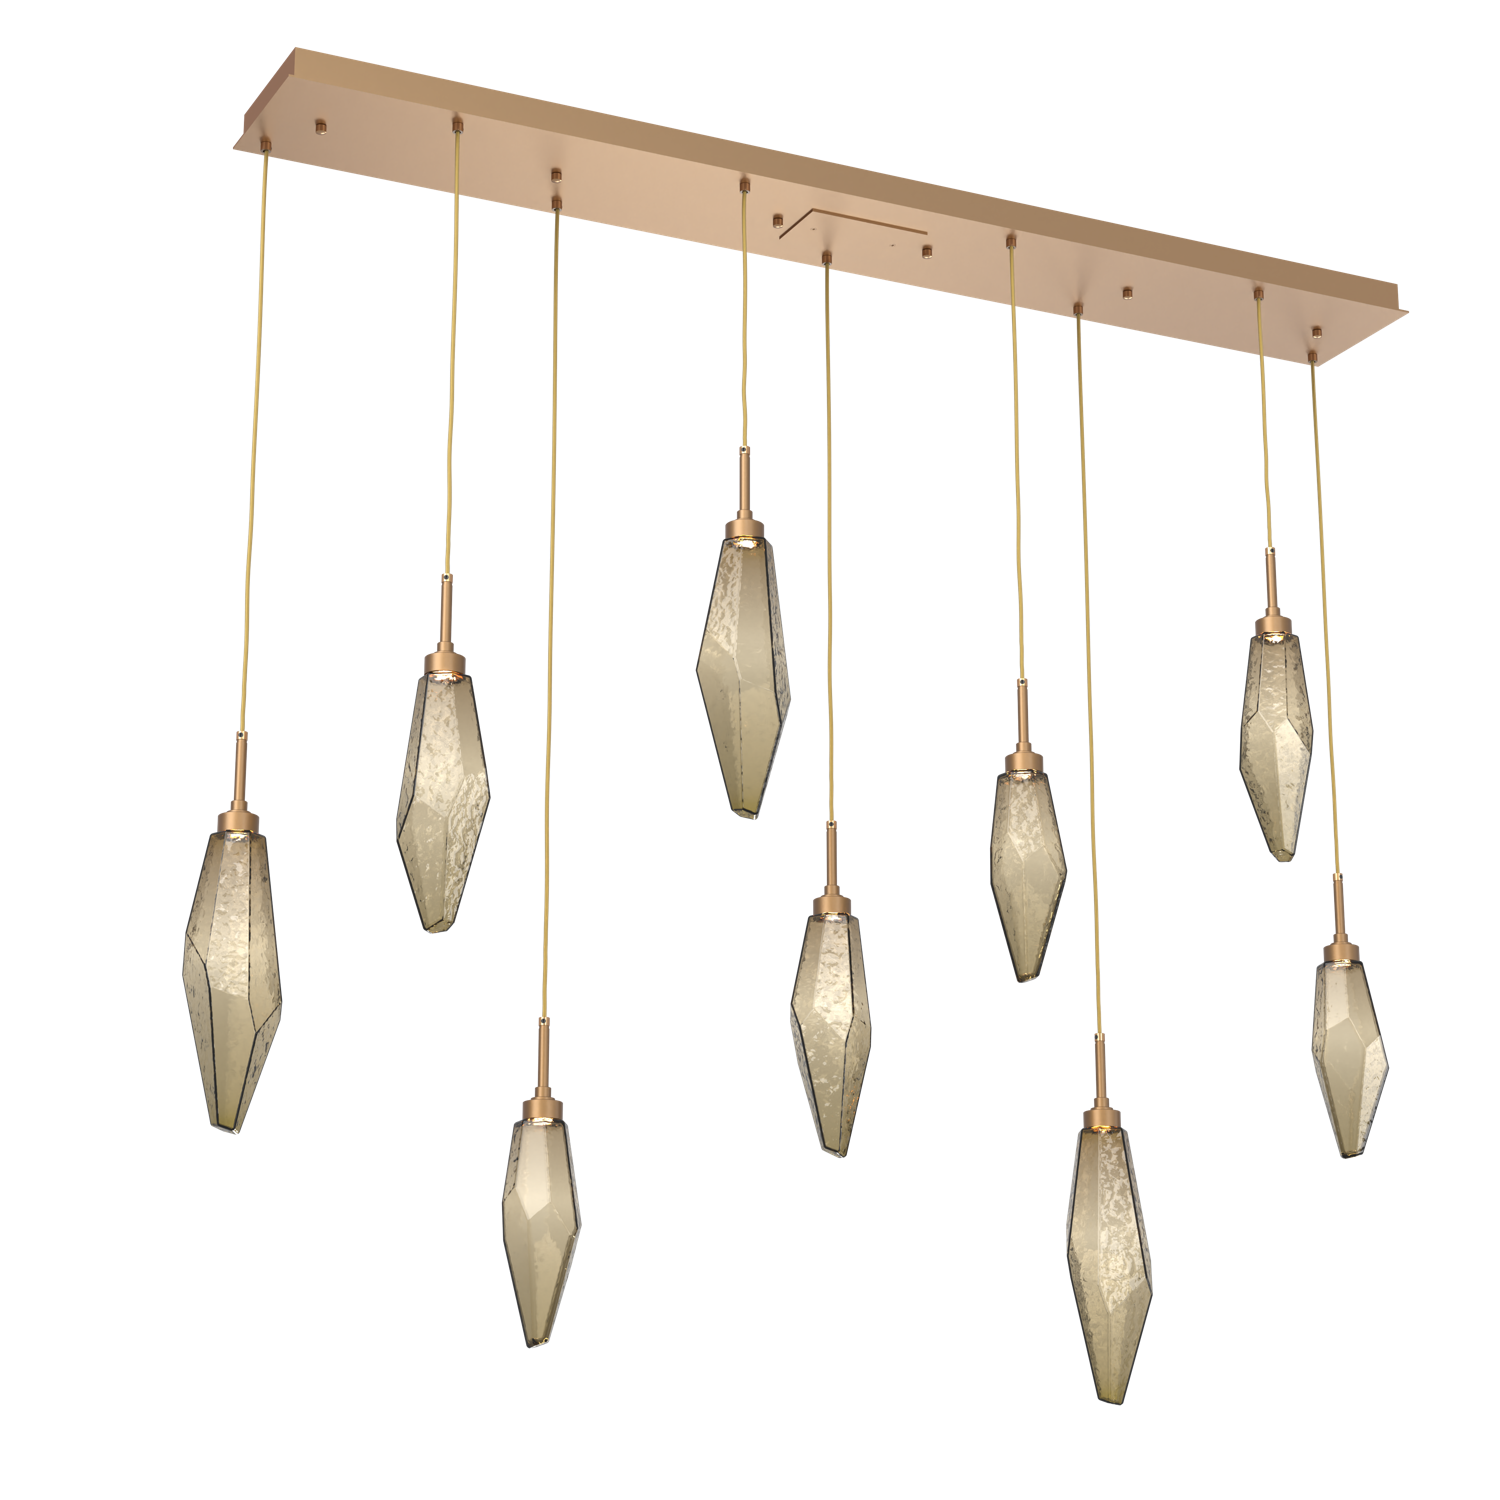 PLB0050-09-NB-CB-Hammerton-Studio-Rock-Crystal-9-light-linear-pendant-chandelier-with-novel-brass-finish-and-chilled-bronze-blown-glass-shades-and-LED-lamping